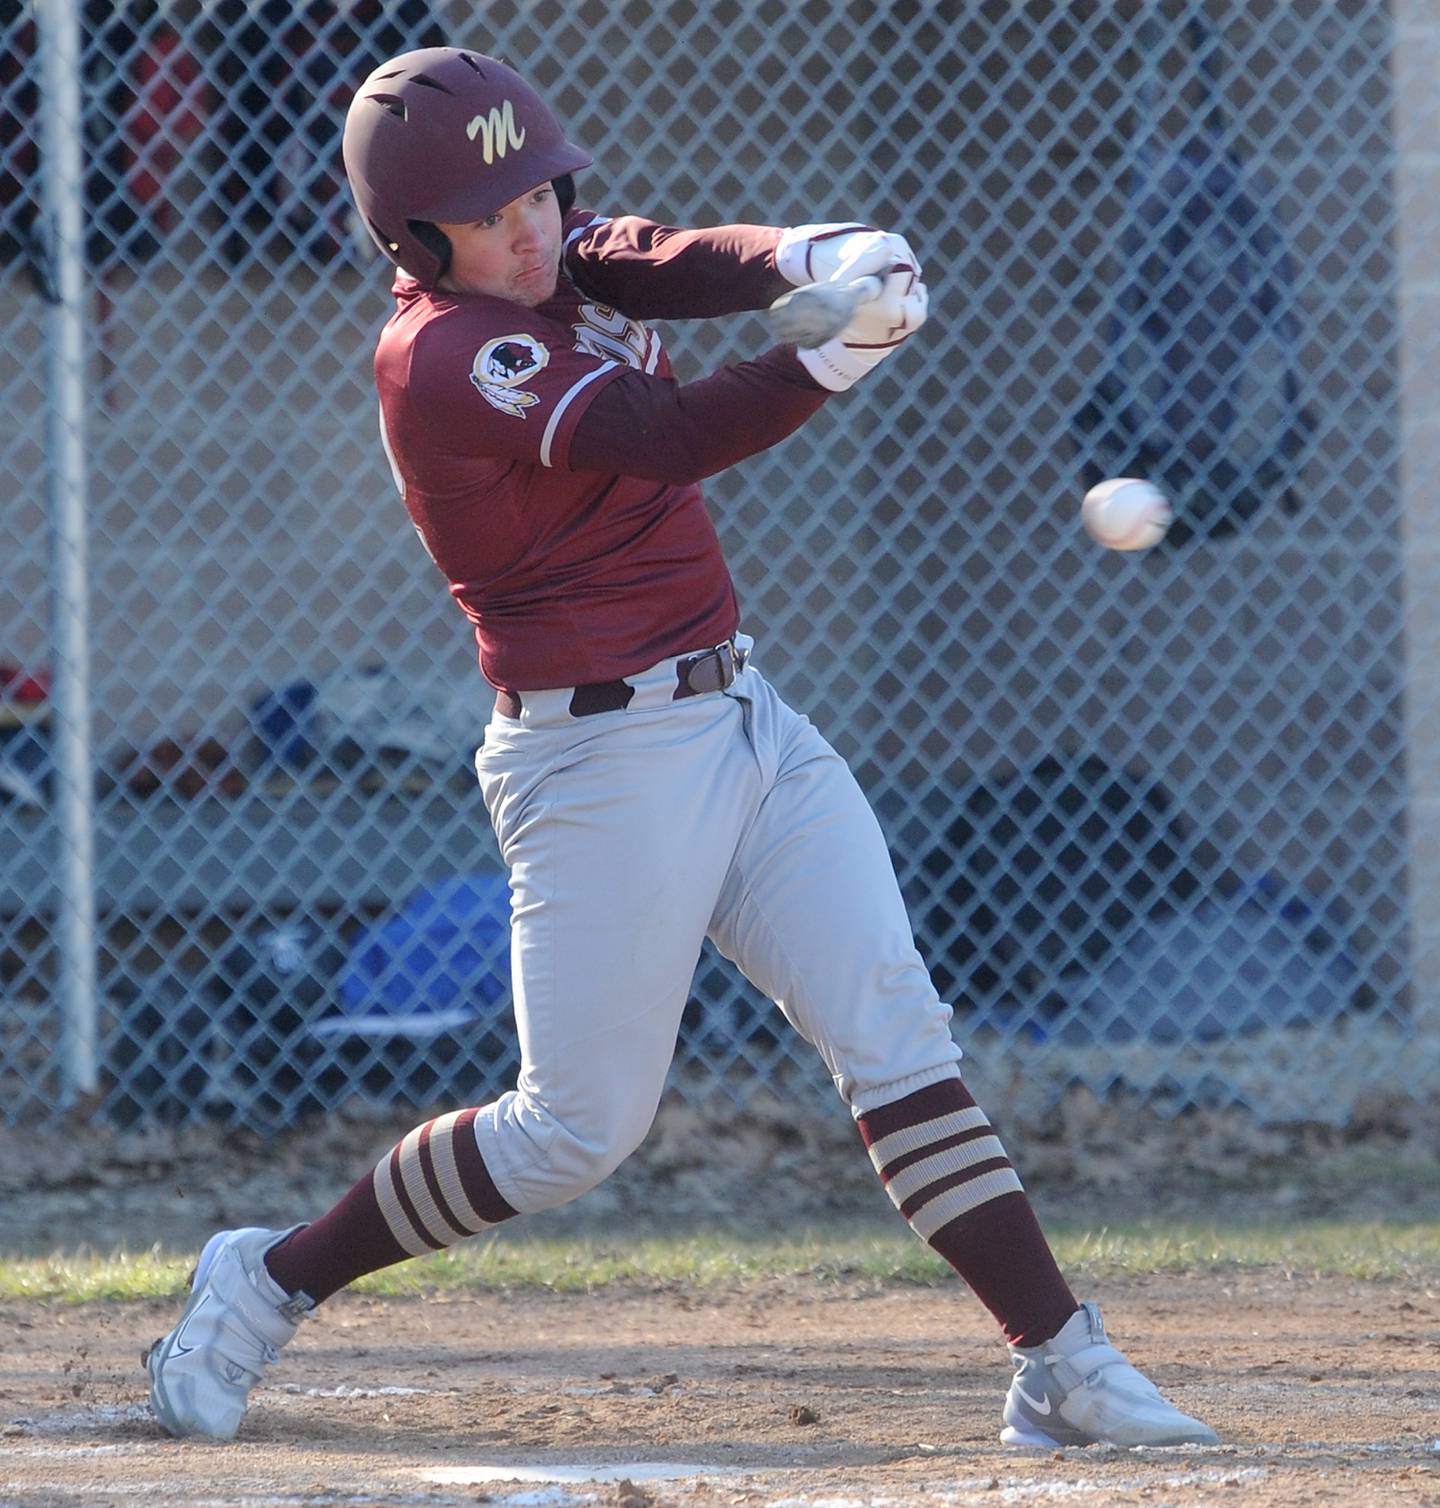 Morris batter A.J. Franzetti puts a ball in play during a varsity baseball game at Newark High School on Wednesday, Mar. 29, 2023.